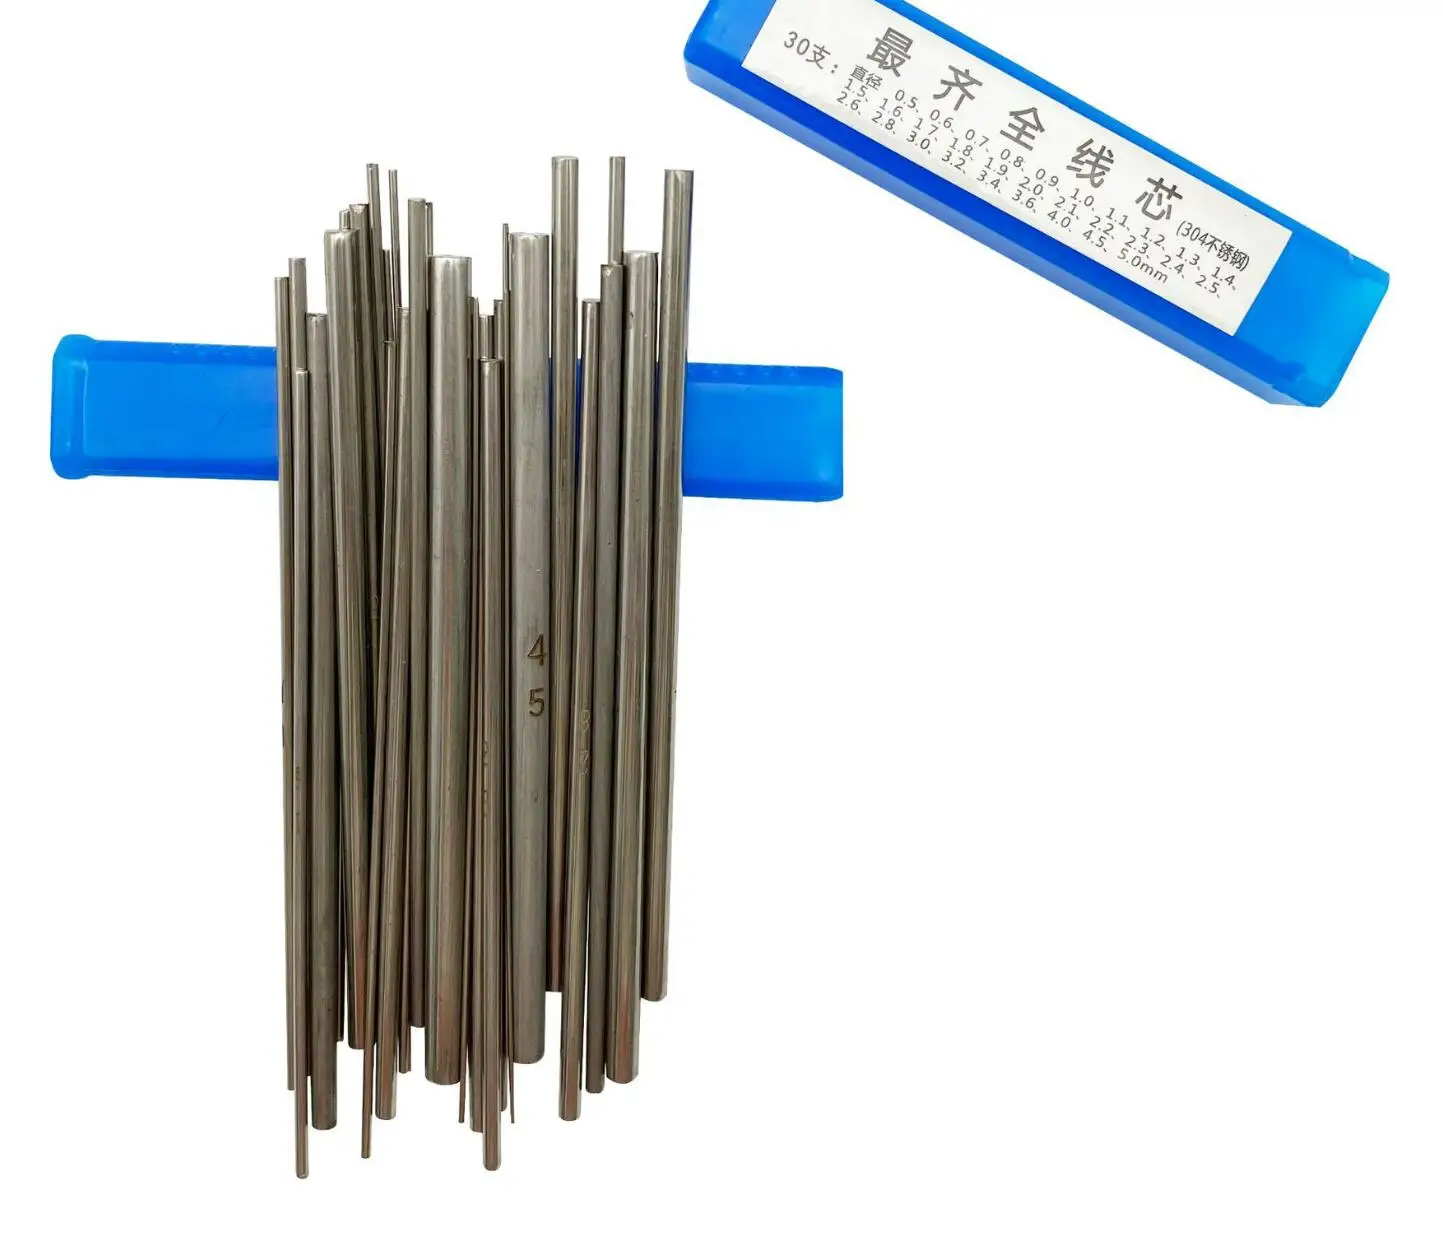 10cm Length Solid Wire Core Stick Roll Mandrel Jewelry Gold Making Tool Stainless Steel 30 Pieces Diameter 0.4-4.5mm stainless steel non powered rollers diameter 25 38 total length 100 500mm conveyor lines rollers accessories